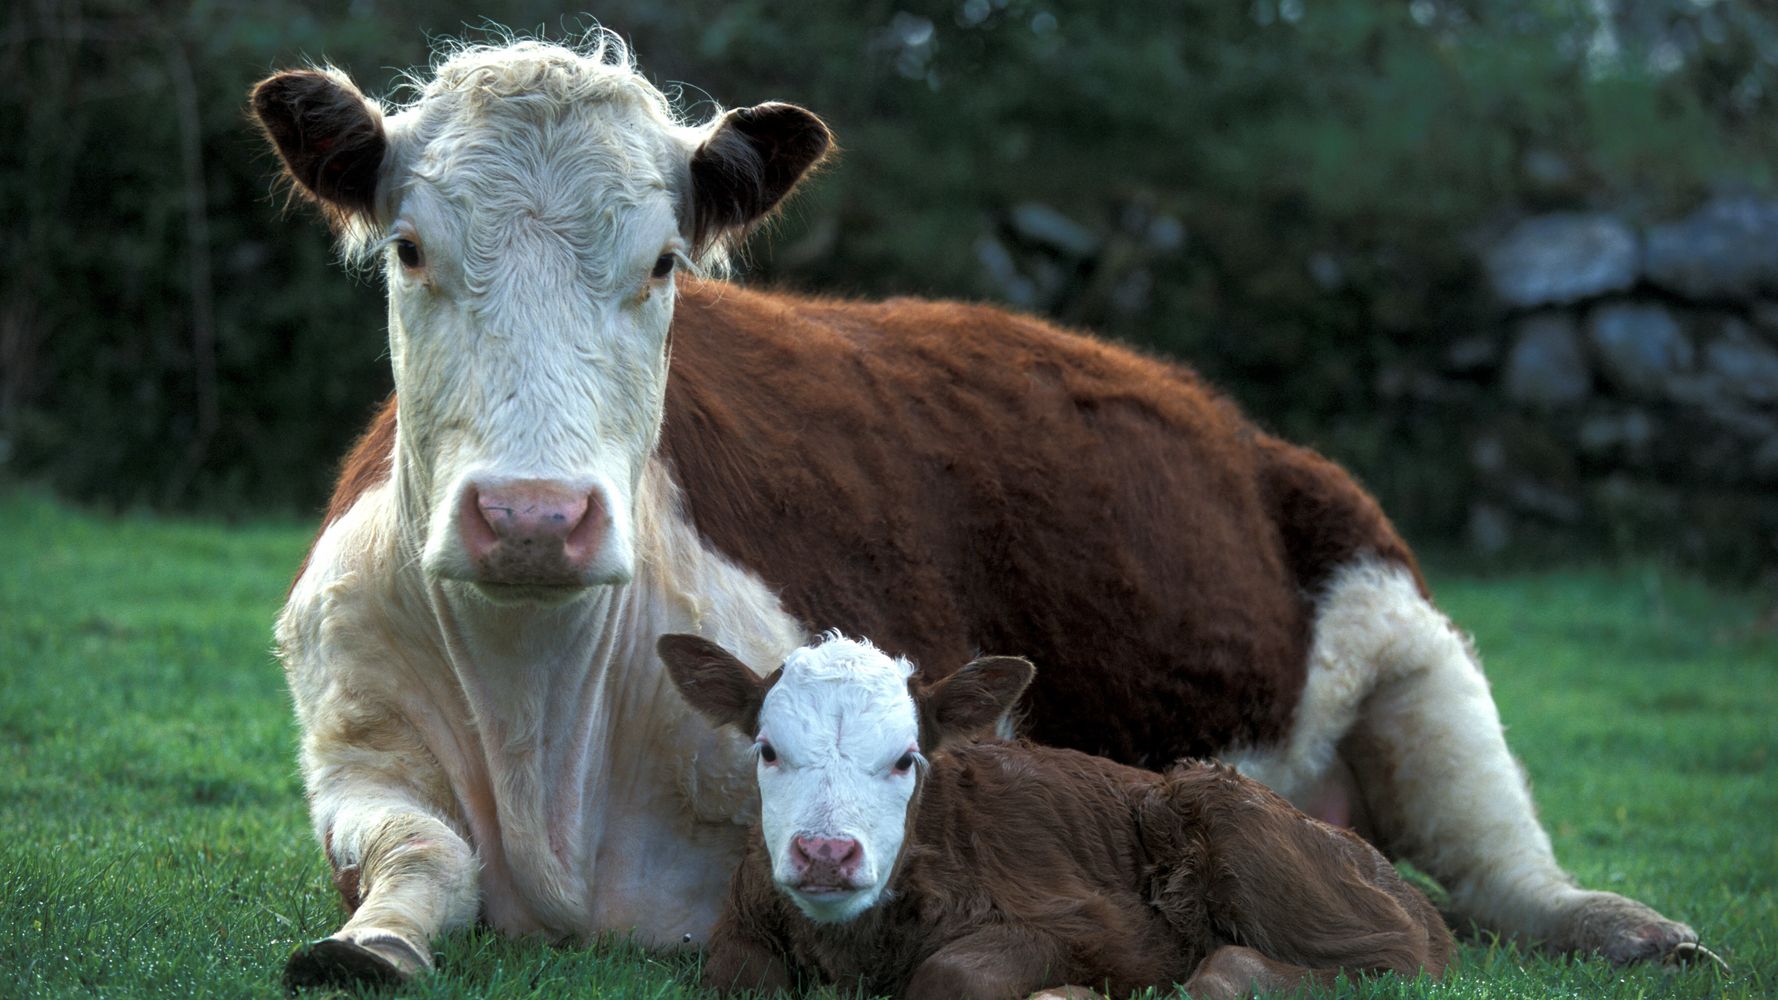 Mother Cow Kills Woman Trying To Put Ear Tag On Calf